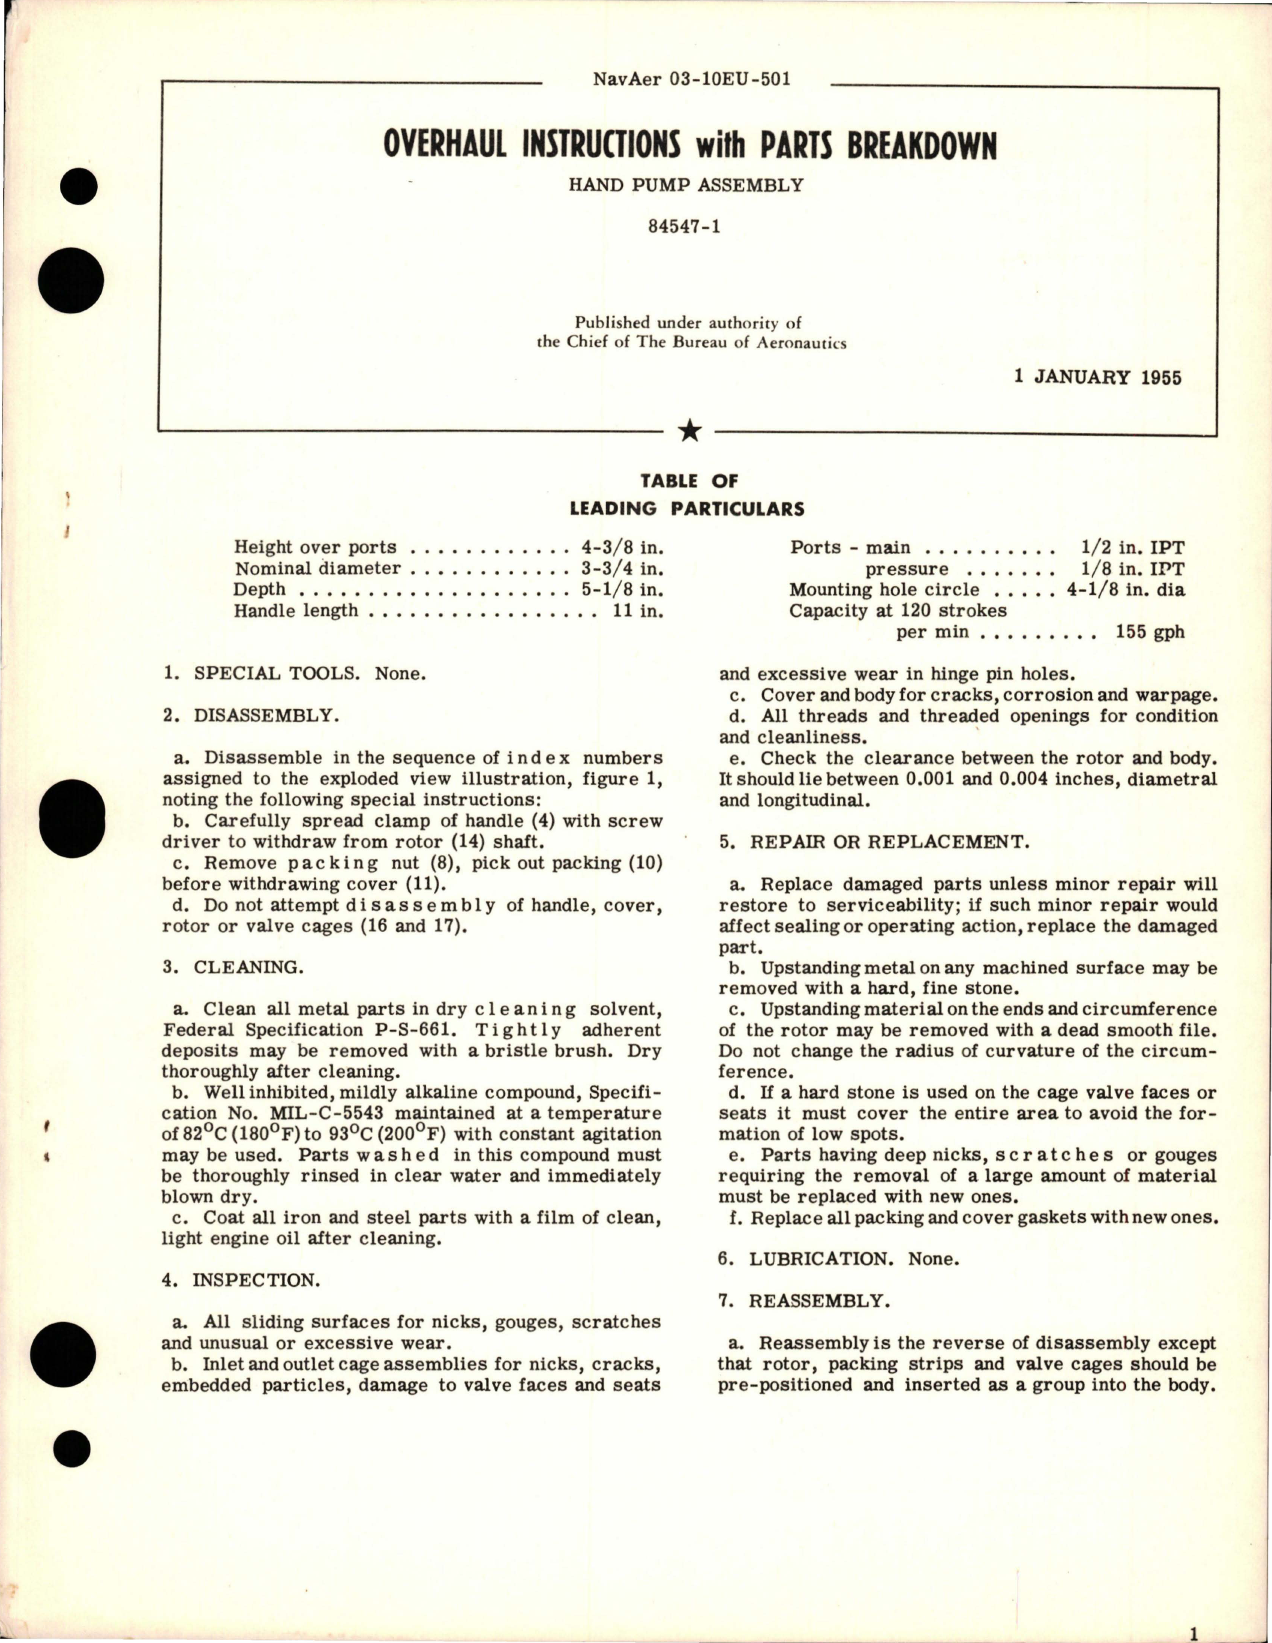 Sample page 1 from AirCorps Library document: Overhaul Instructions with Parts Breakdown for Hand Pump Assembly - 84547-1